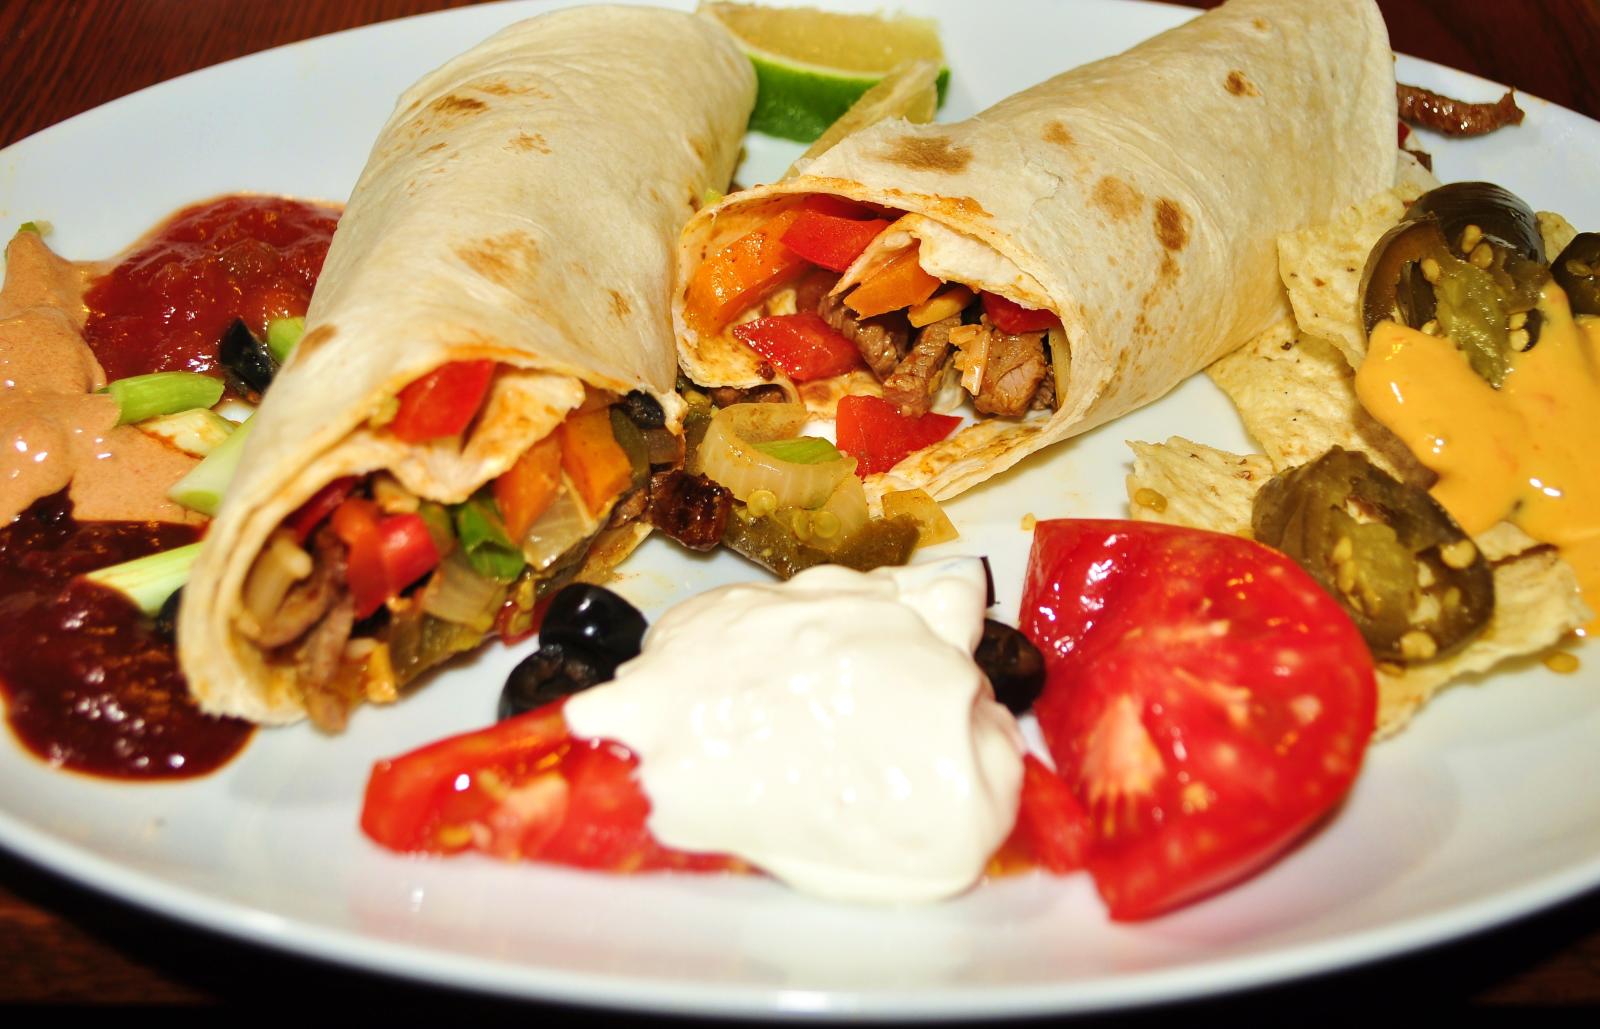 burritos are stuffed with meat, lettuce, tomato, peppers and sour cream